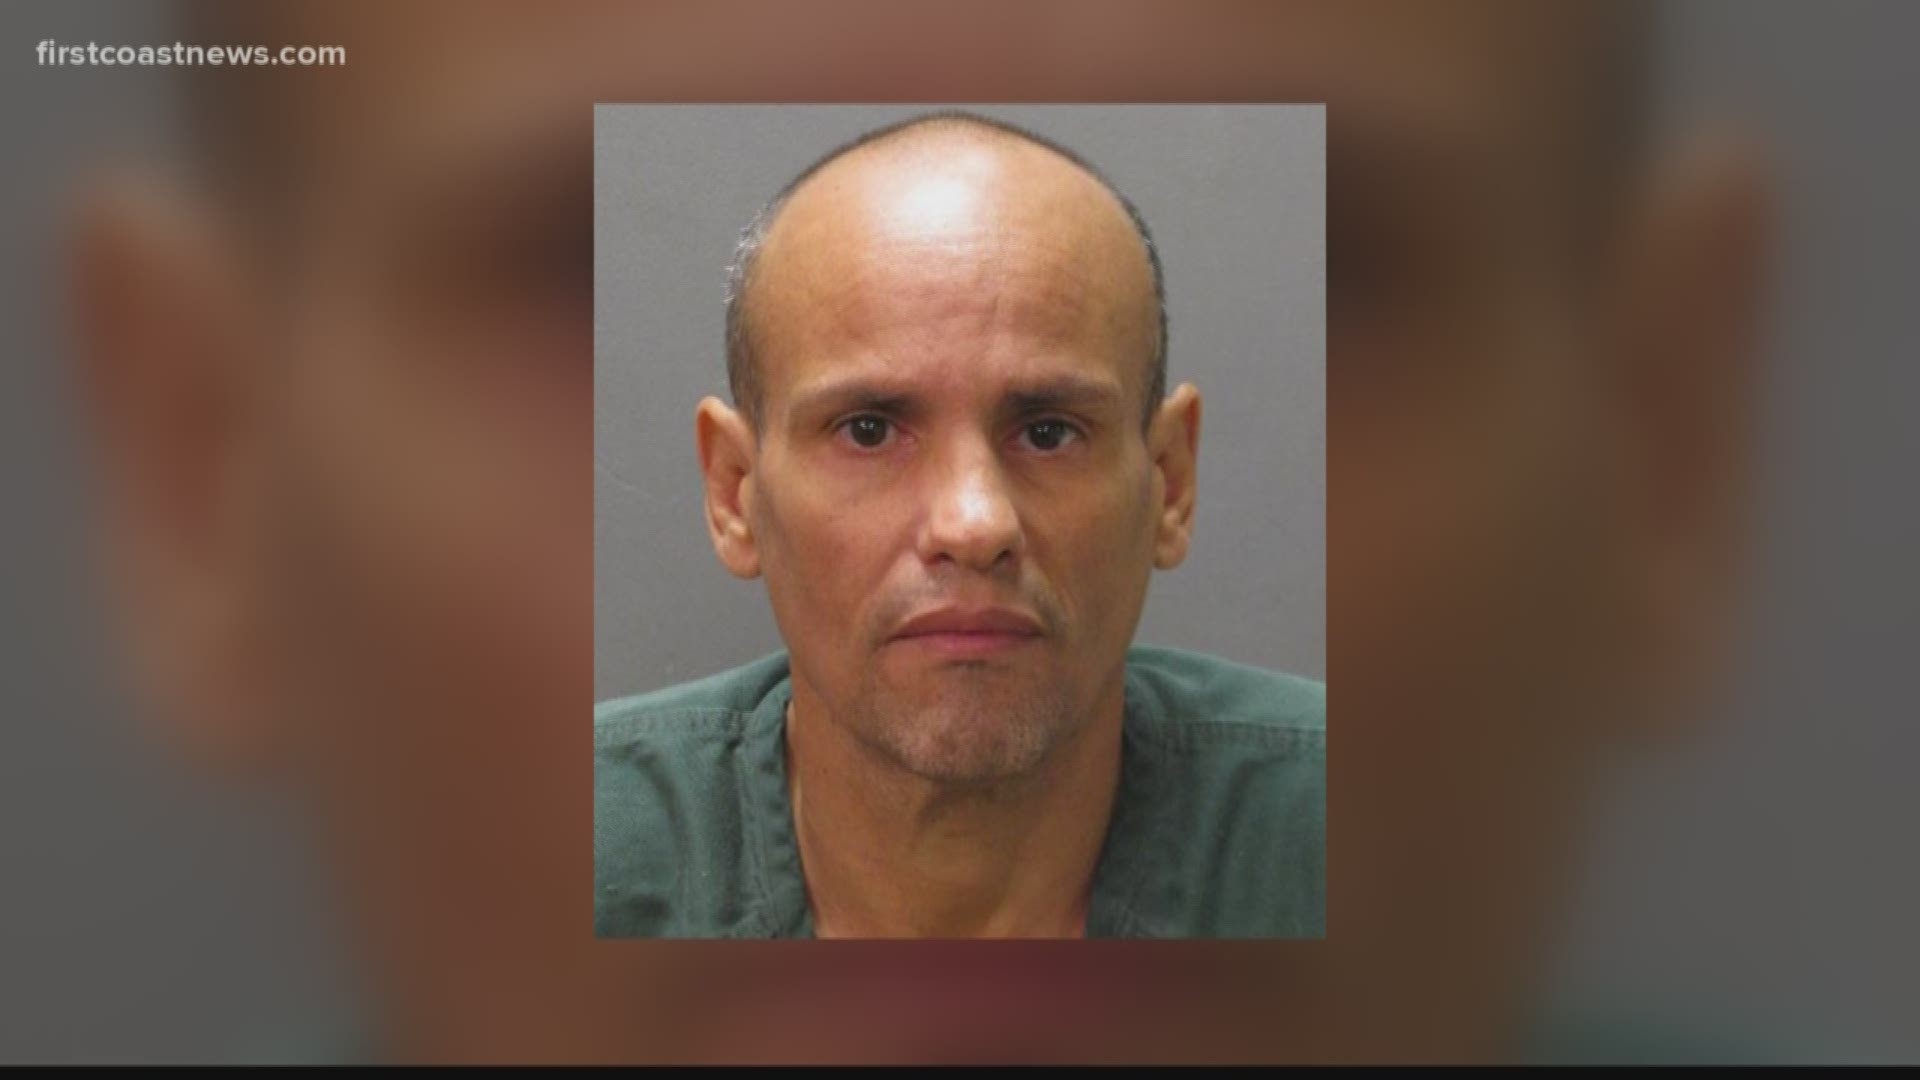 We've learned the name of the man killed in Duval County jail; the